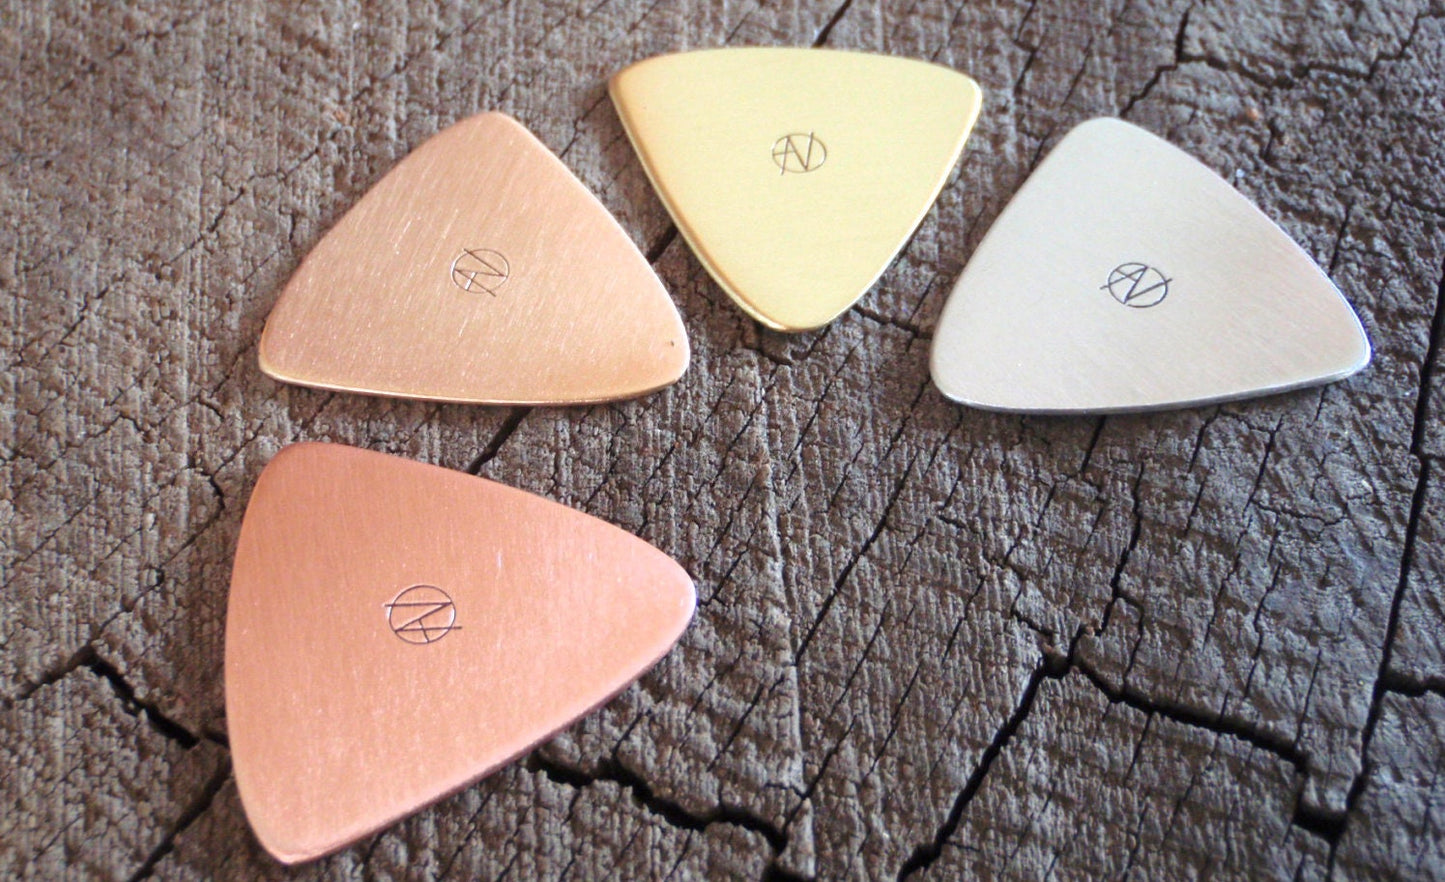 Mixed grab bag of playable metal guitar picks in triangular shape - copper , brass , bronze and aluminum - QTY 4